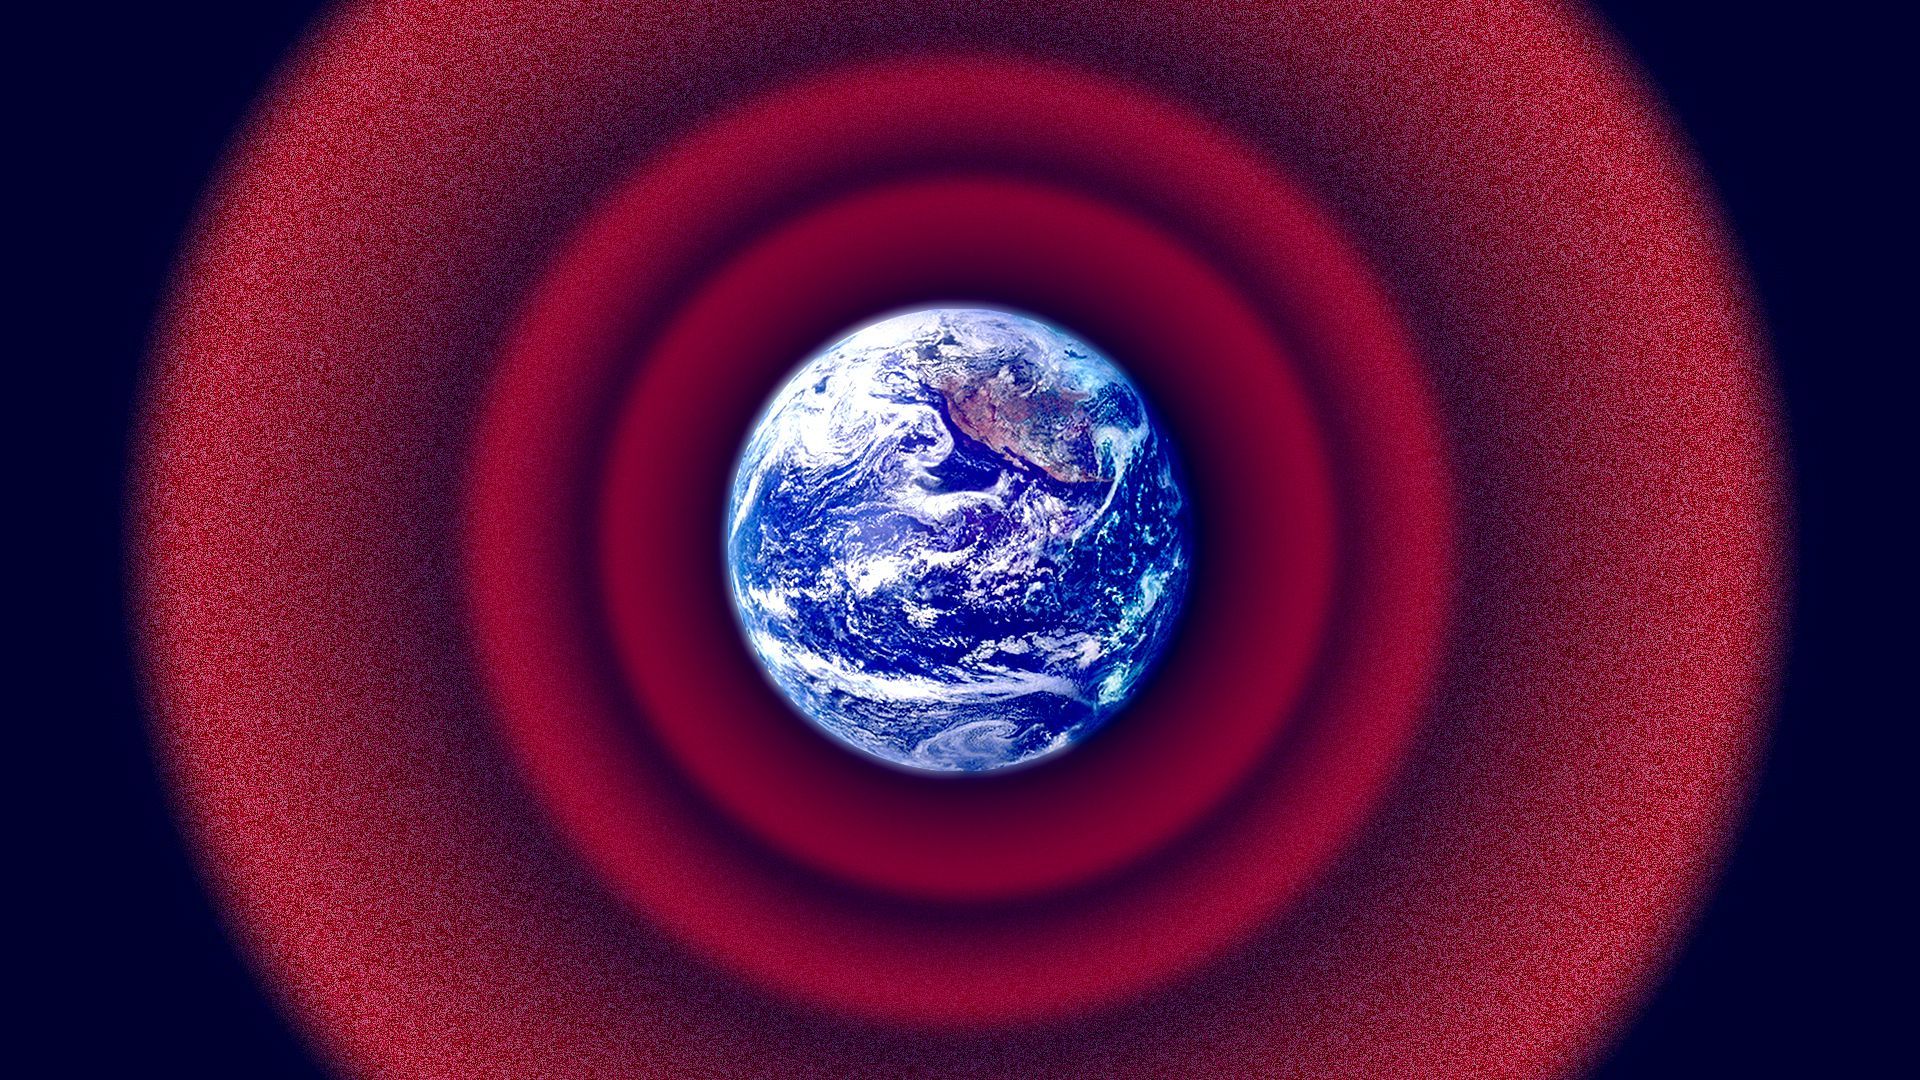 Illustration of Earth with red rings emanating outward